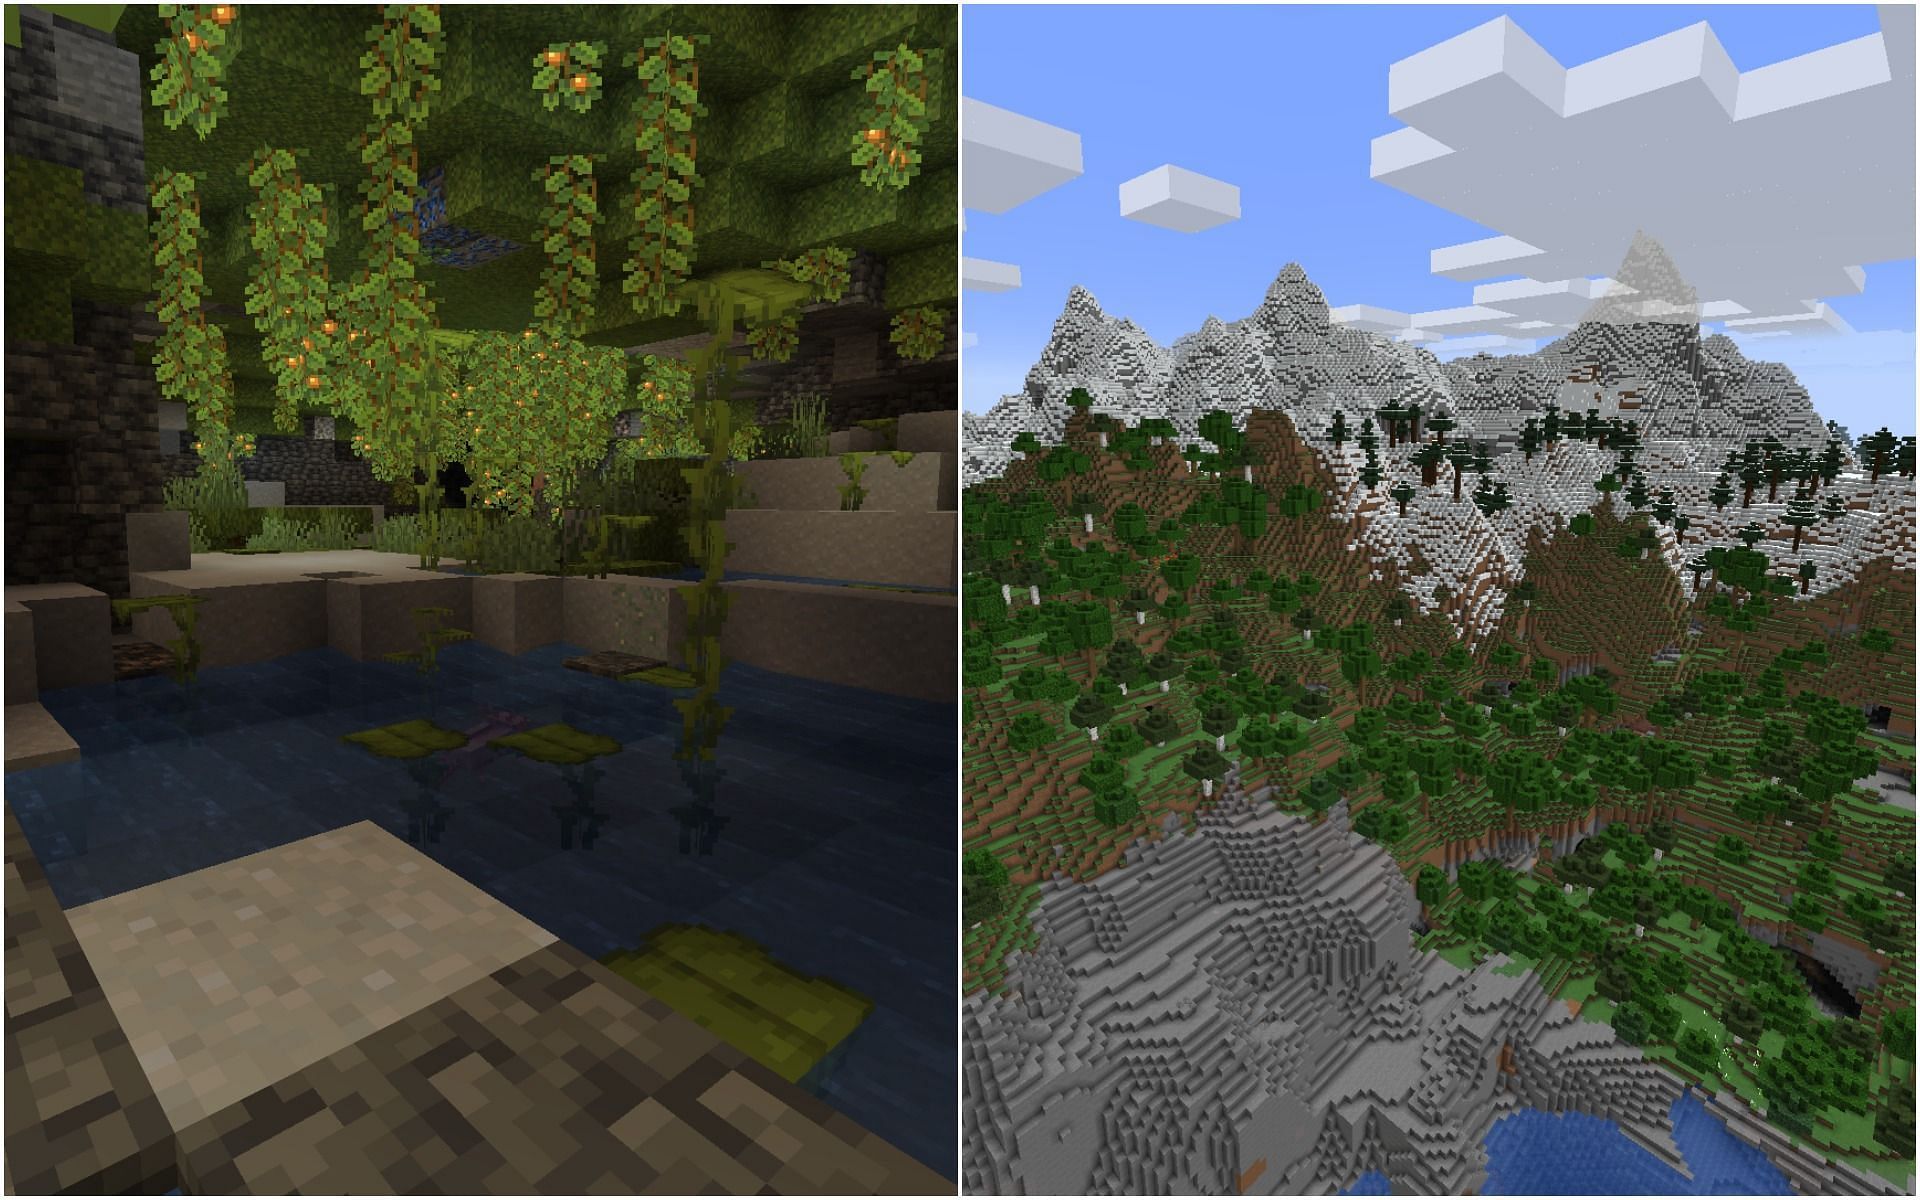 Caves and mountains in Minecraft 1.18 (Image via Minecraft)